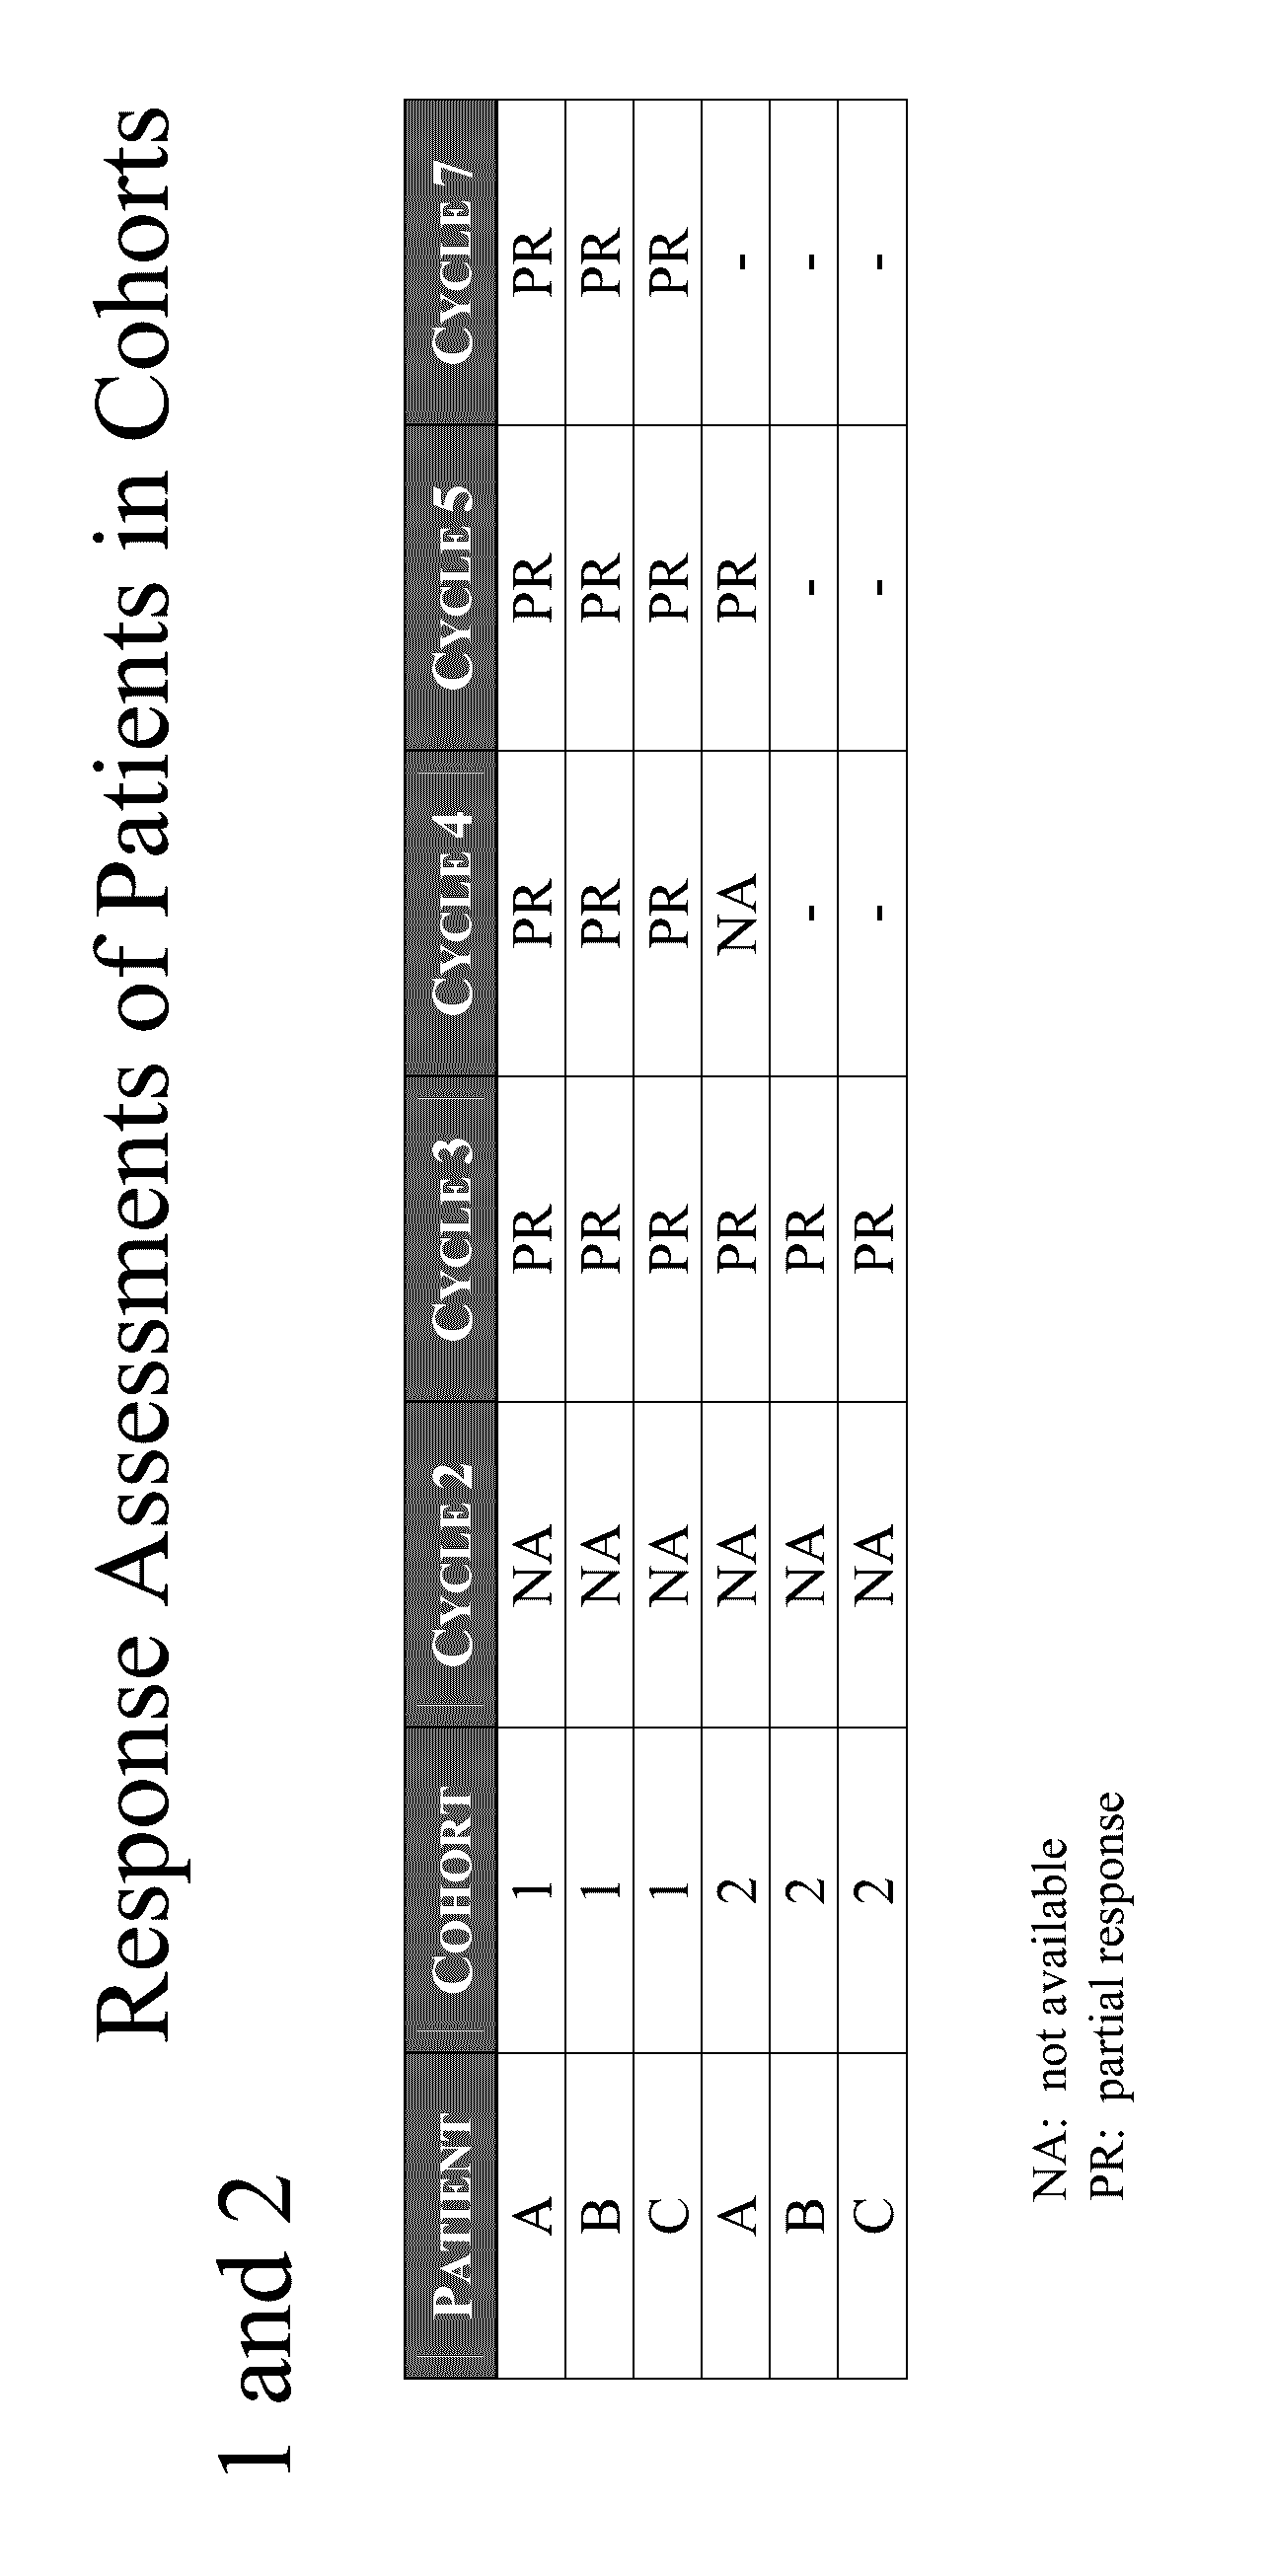 Methods of treating a disease or disorder associated with Bruton'S Tyrosine Kinase